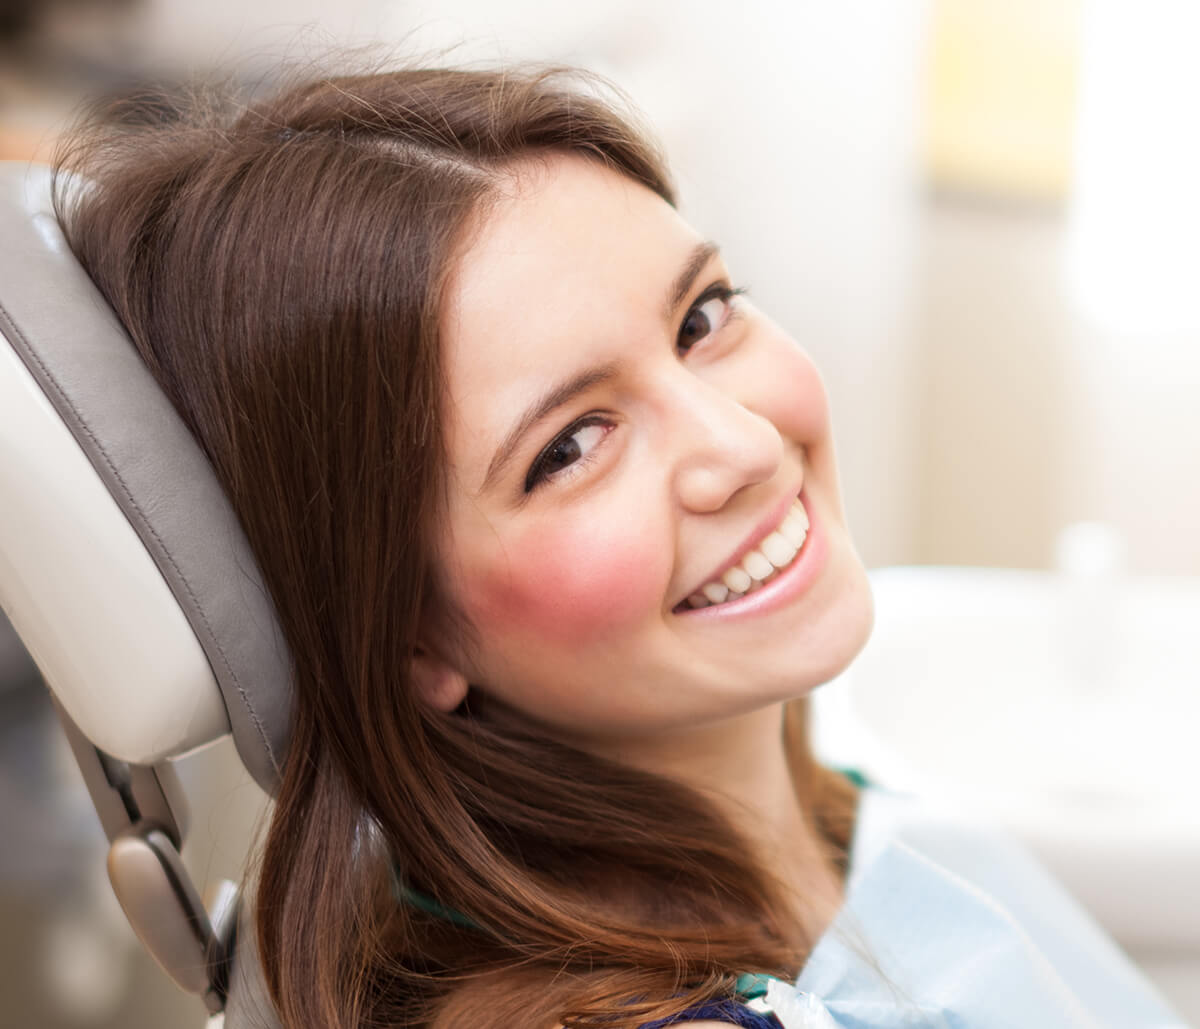 Top Tips for Finding a Pain-Free Dentist in Houston Area